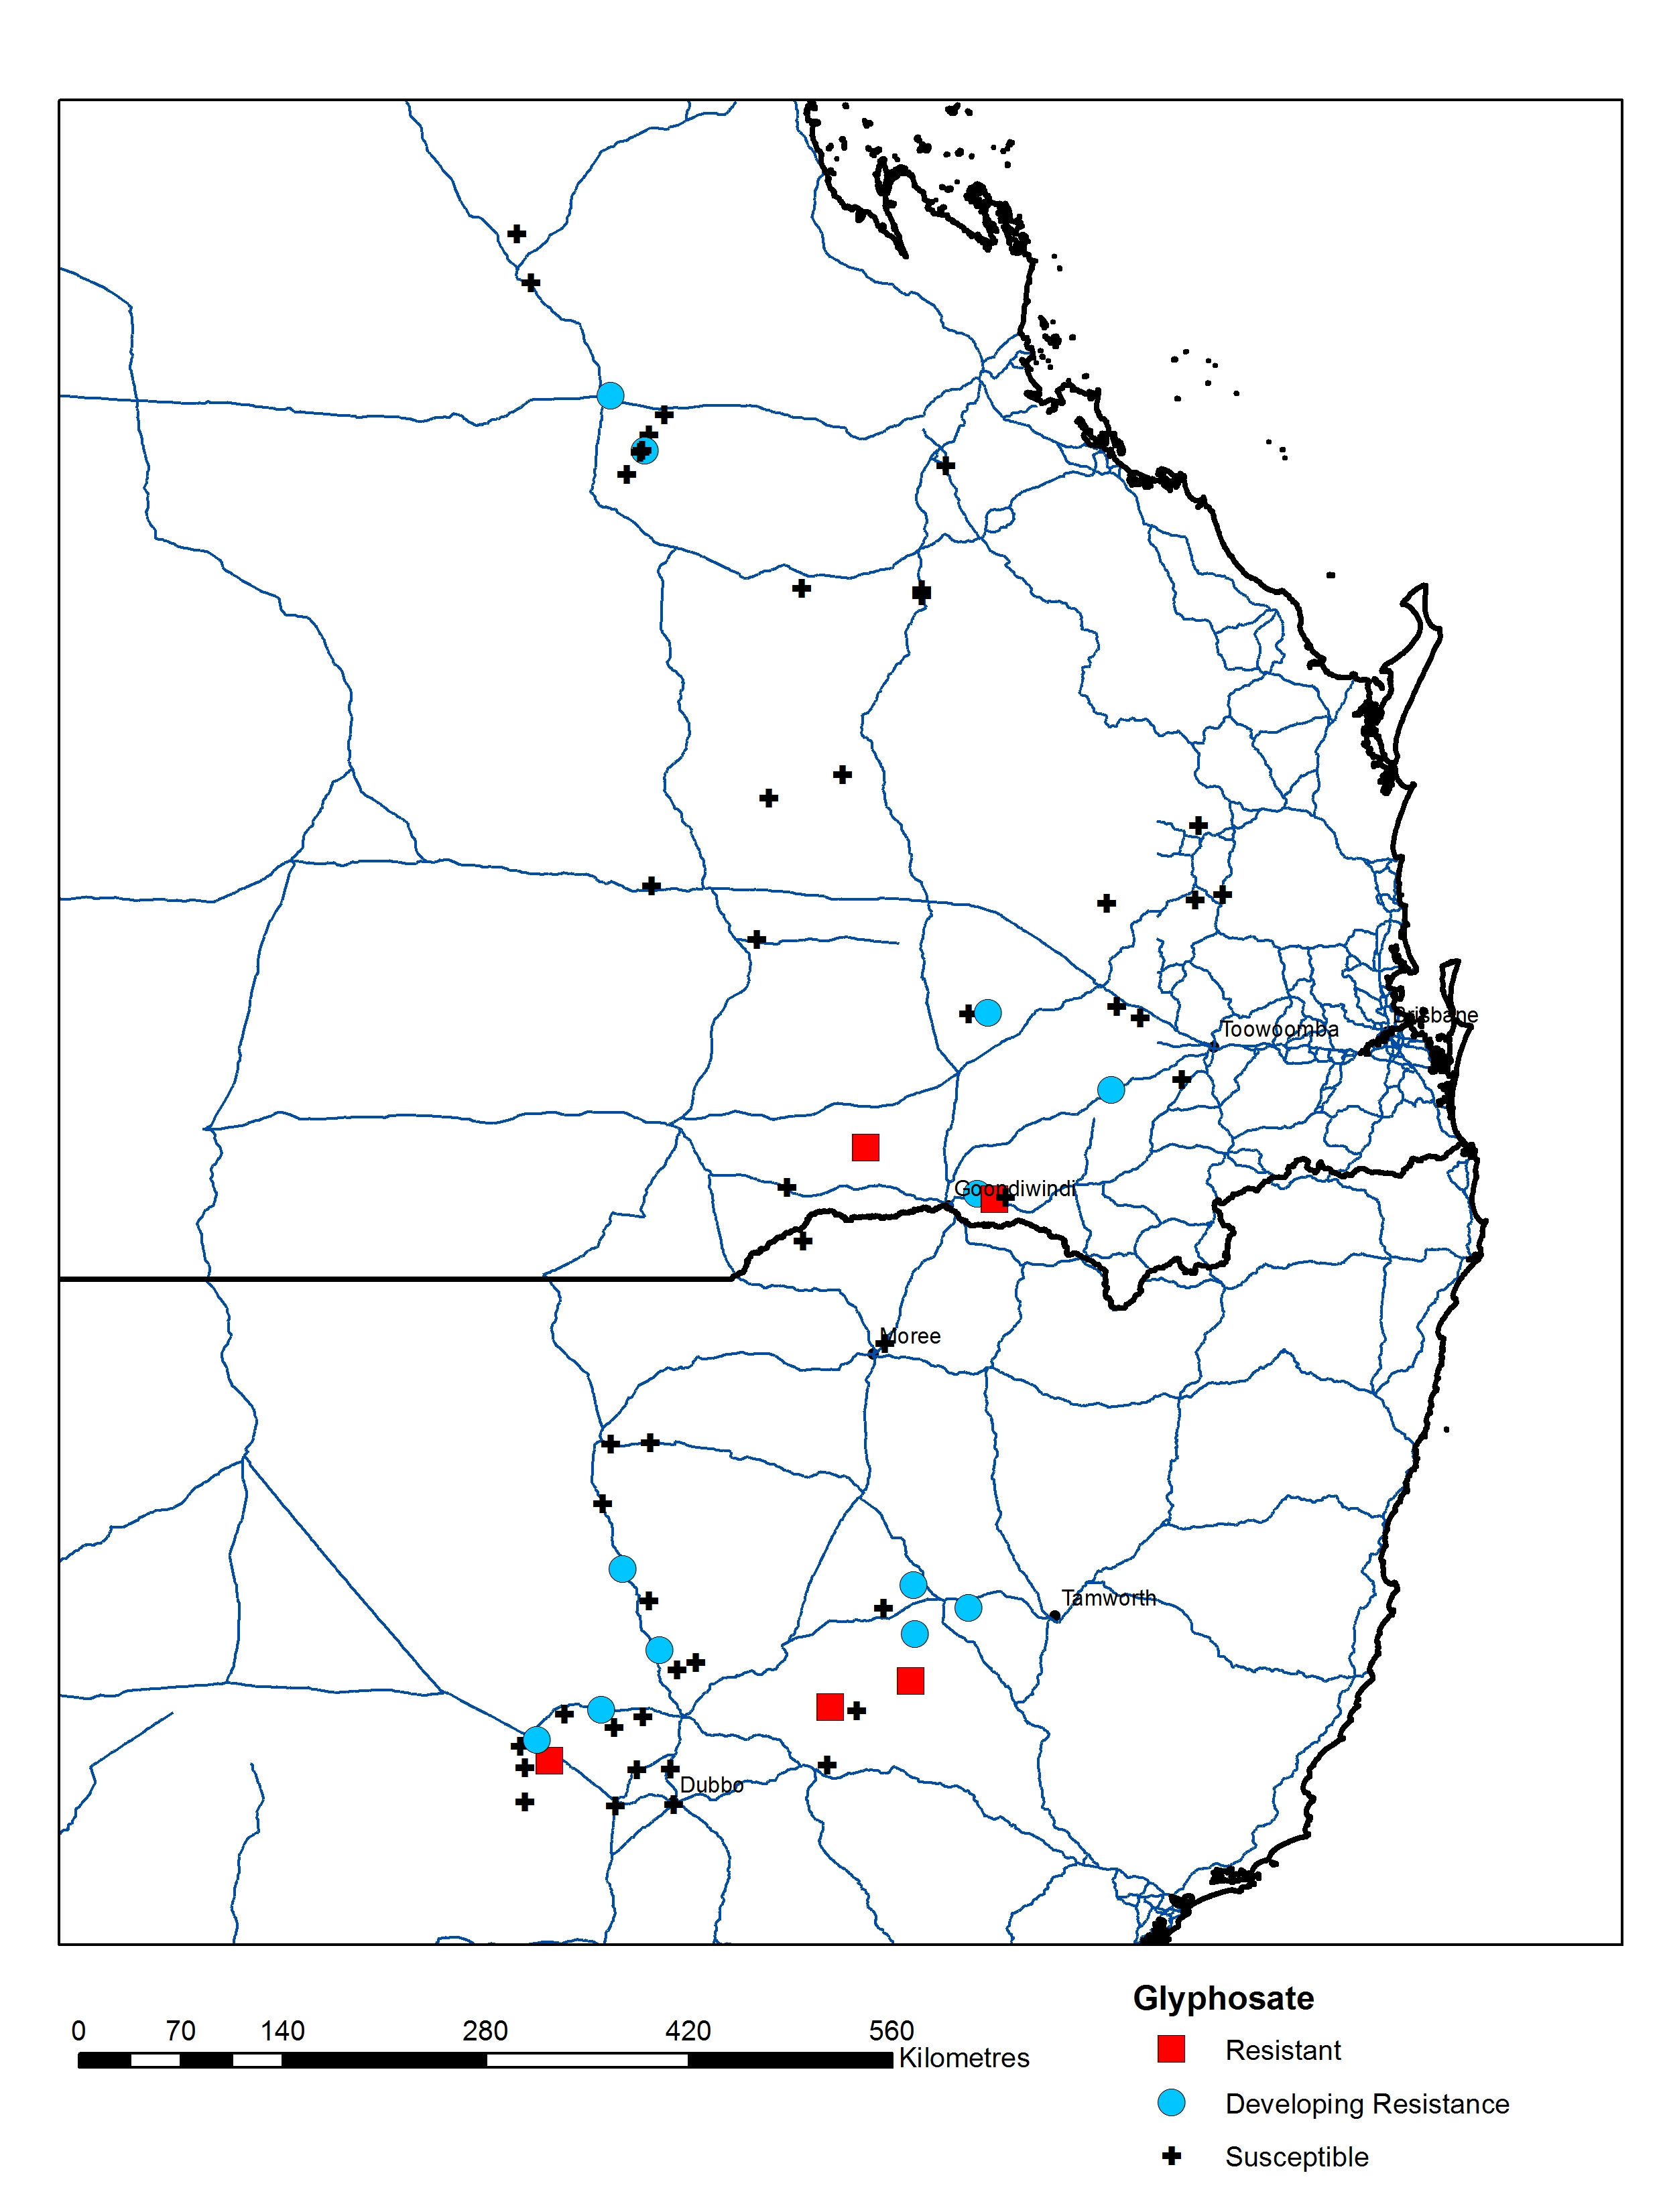 Figure 3 is a map of NSW and Qld showing the location of glyphosate susceptible and resistant sow thistle populations.